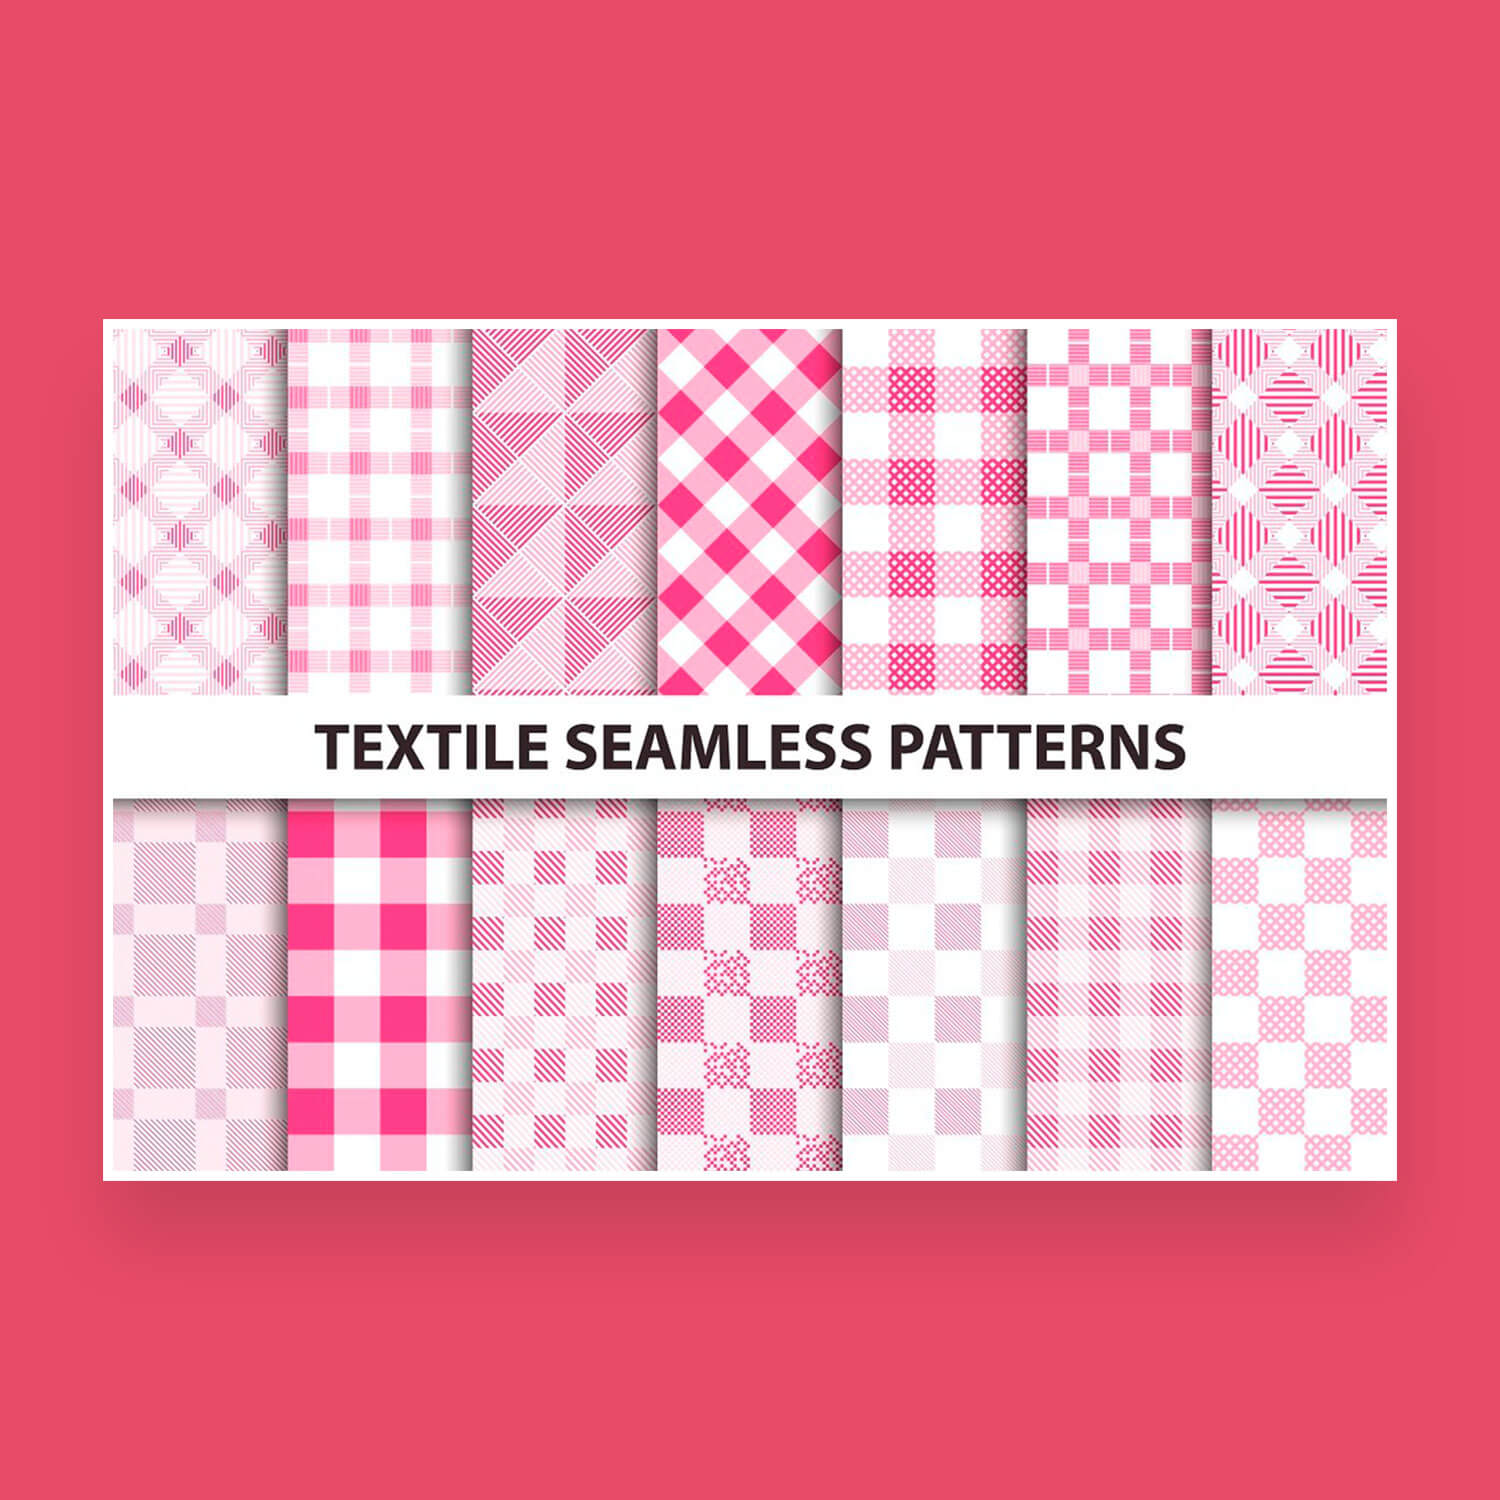 Fourteen pictures of textile seamless patterns.